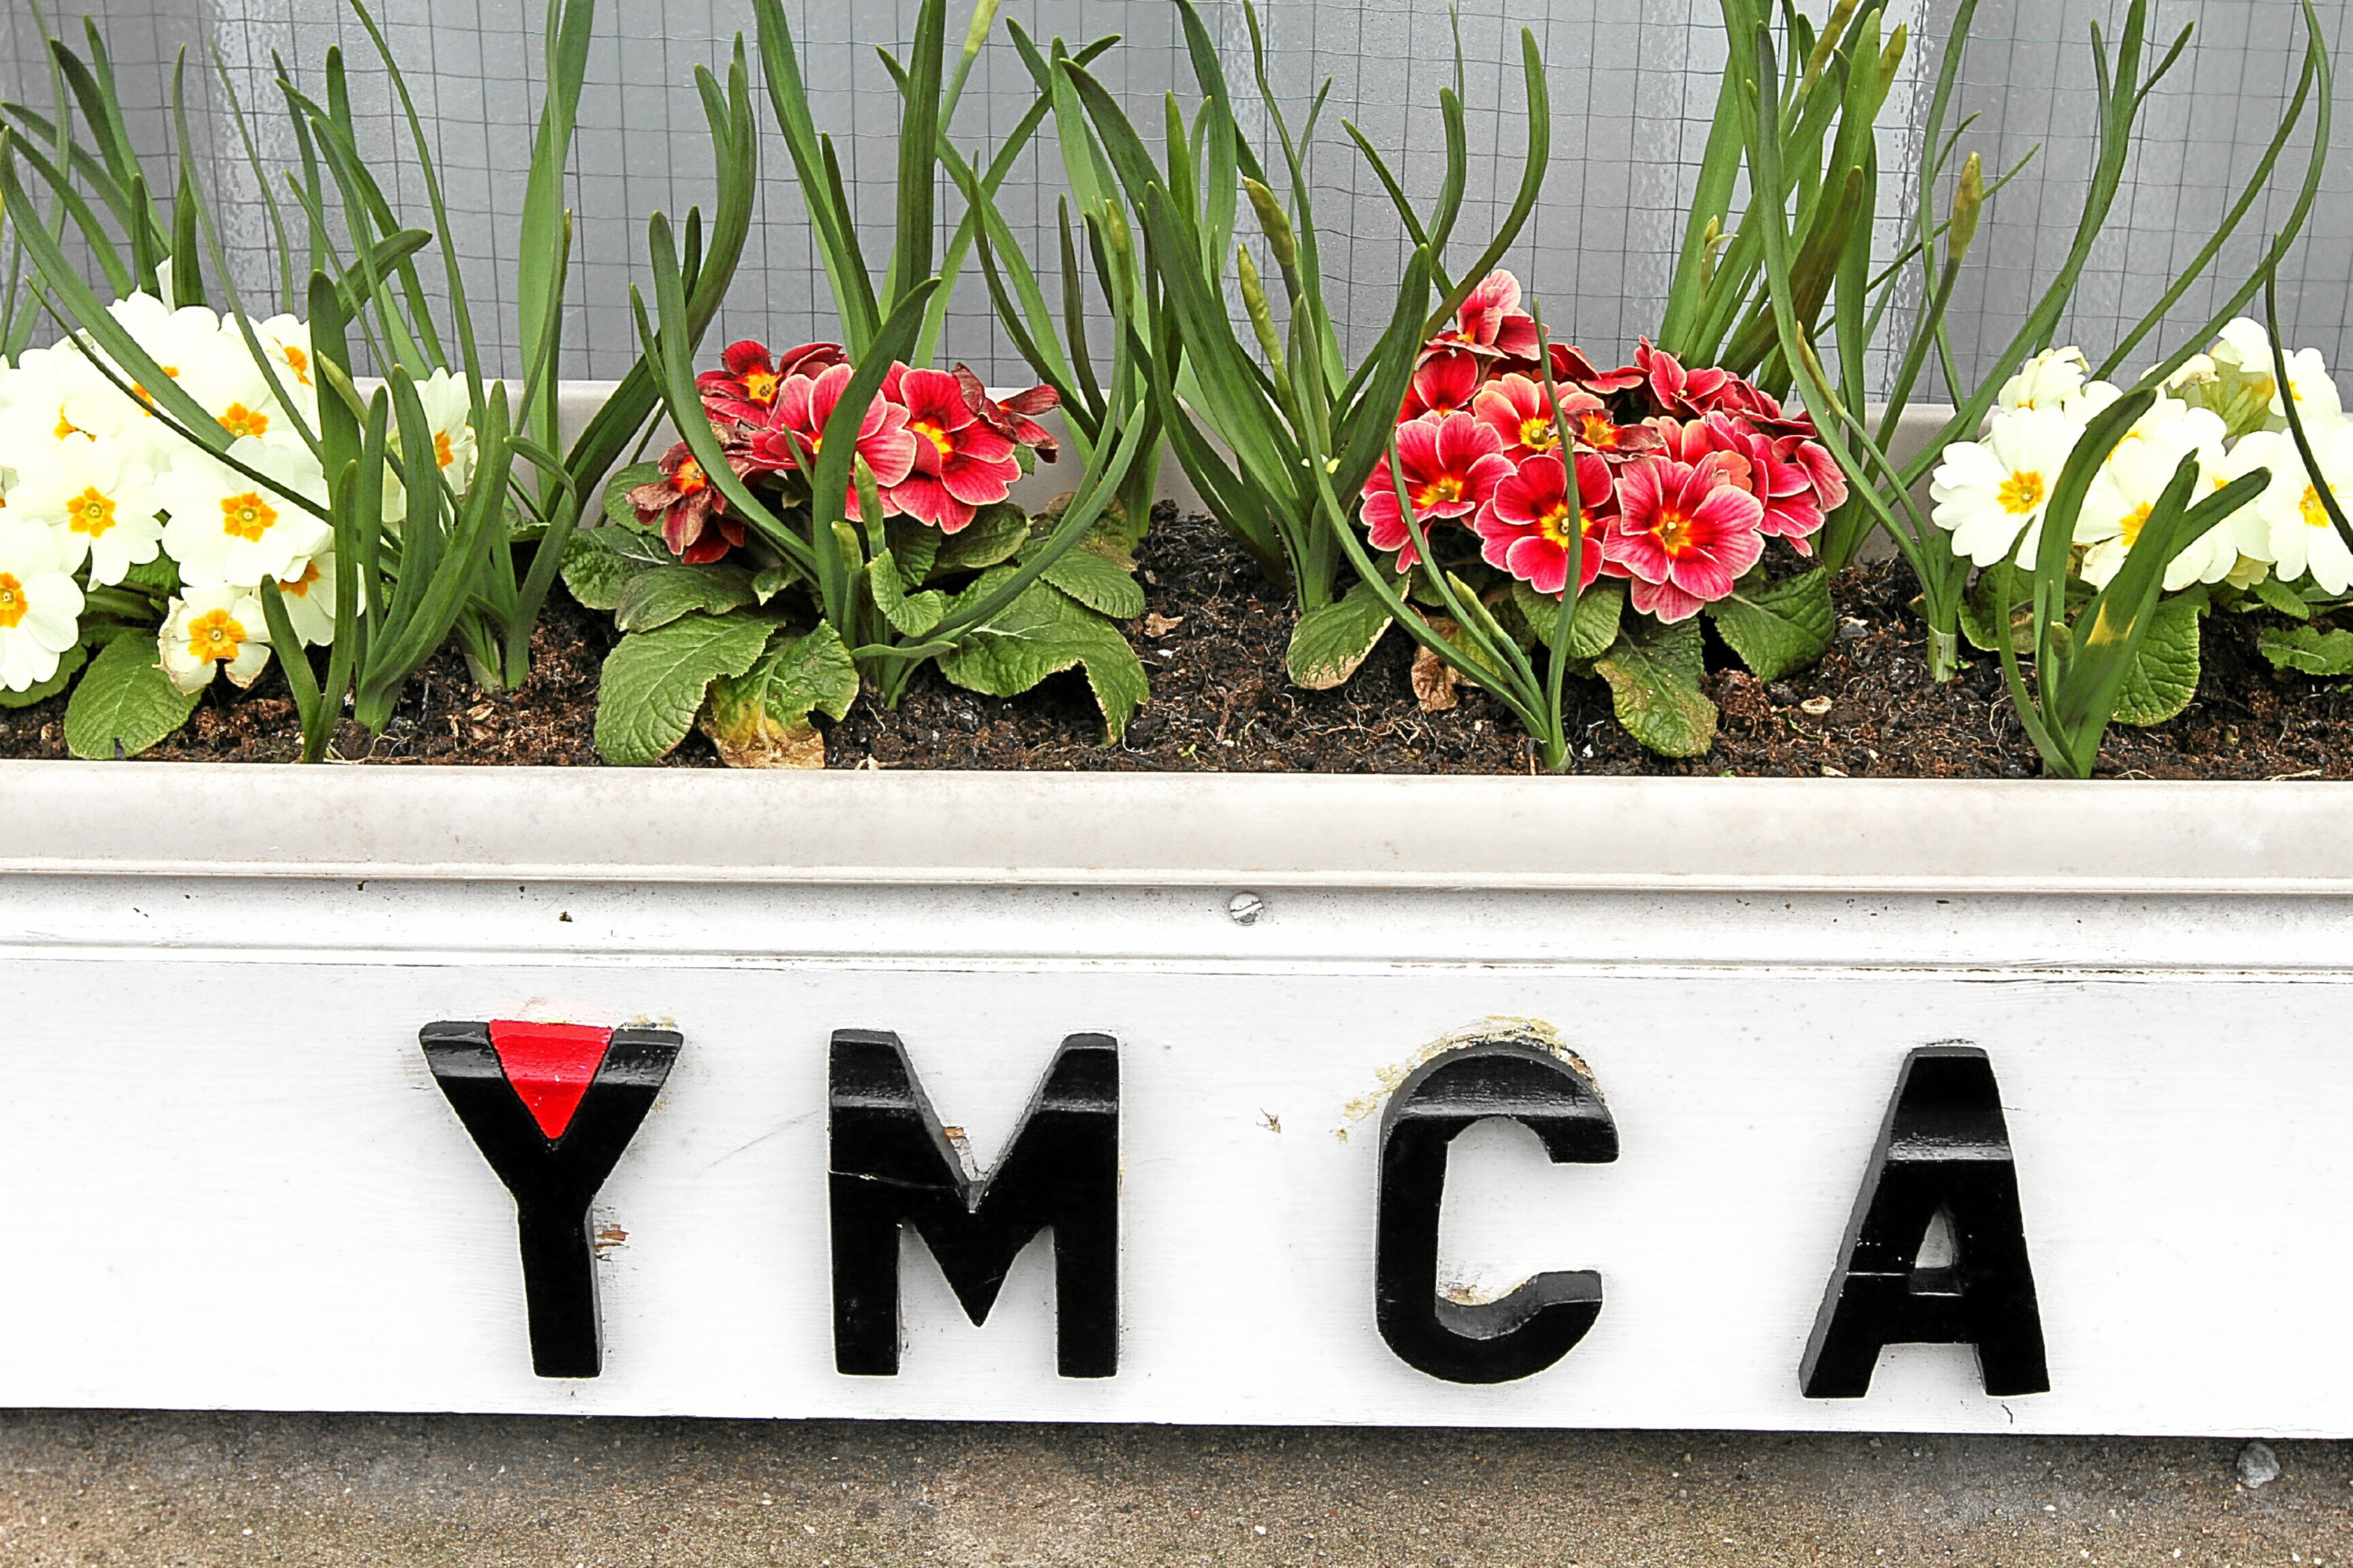 The YMCA is celebrating its 150th anniversary.